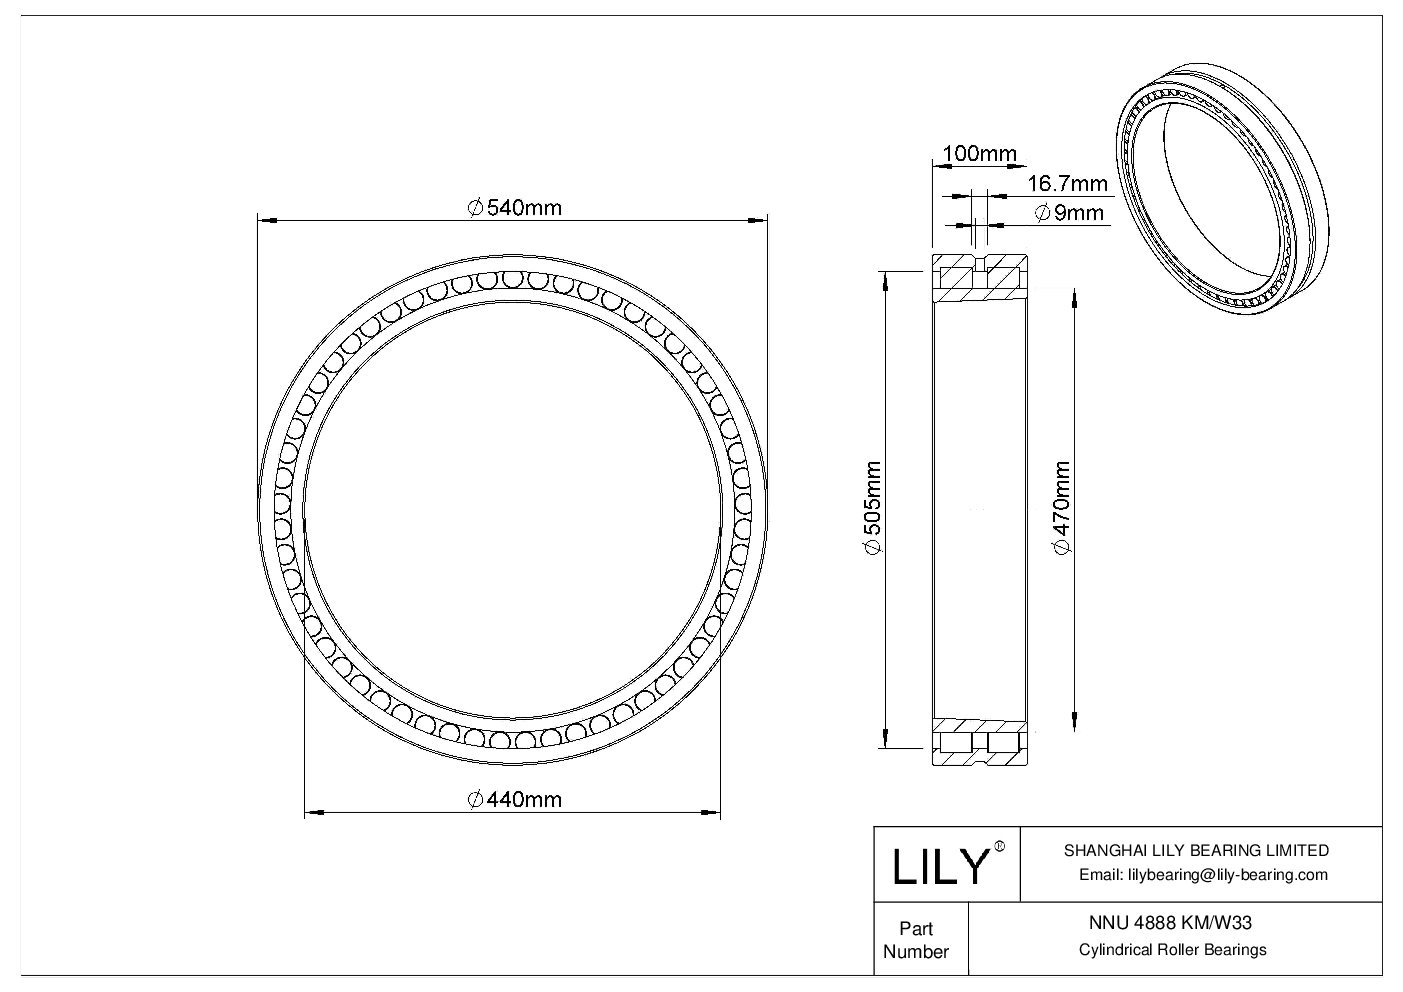 NNU 4888 KM/W33 Double Row Cylindrical Roller Bearings cad drawing